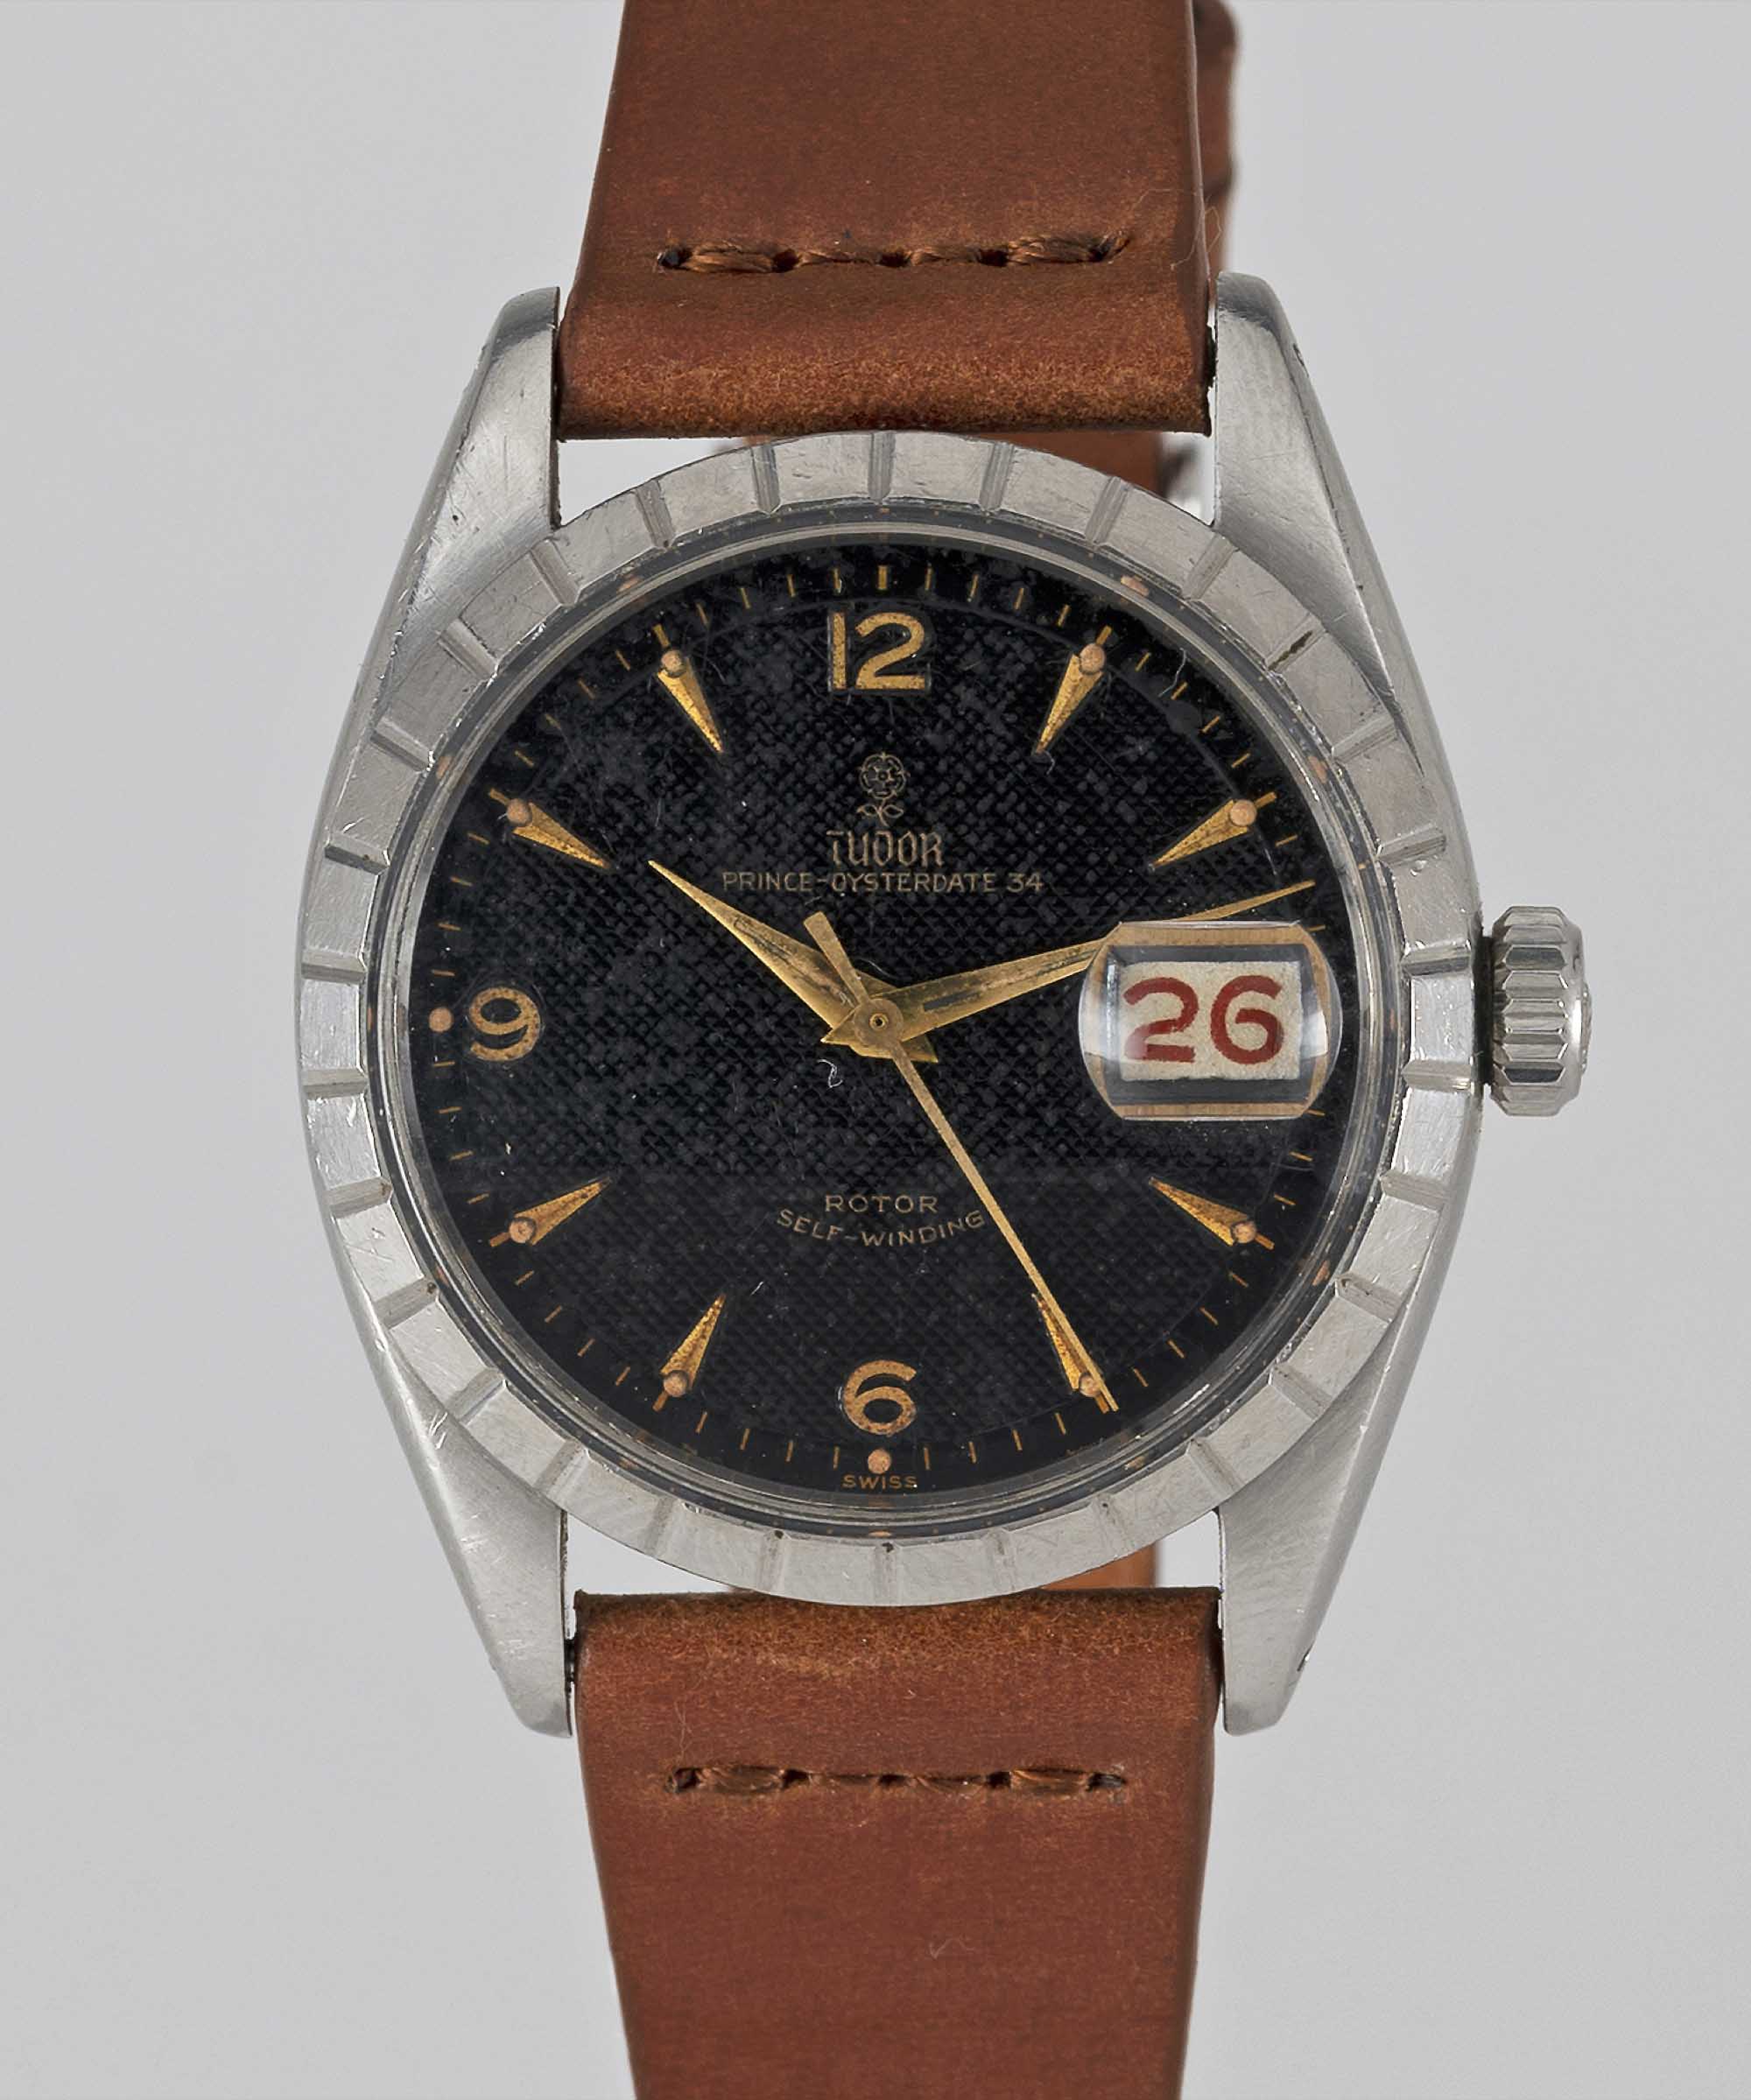 A GENTLEMAN'S STAINLESS STEEL ROLEX TUDOR OYSTERDATE 34 WRIST WATCH CIRCA 1959, REF. 7944 WITH GLOSS - Image 2 of 9